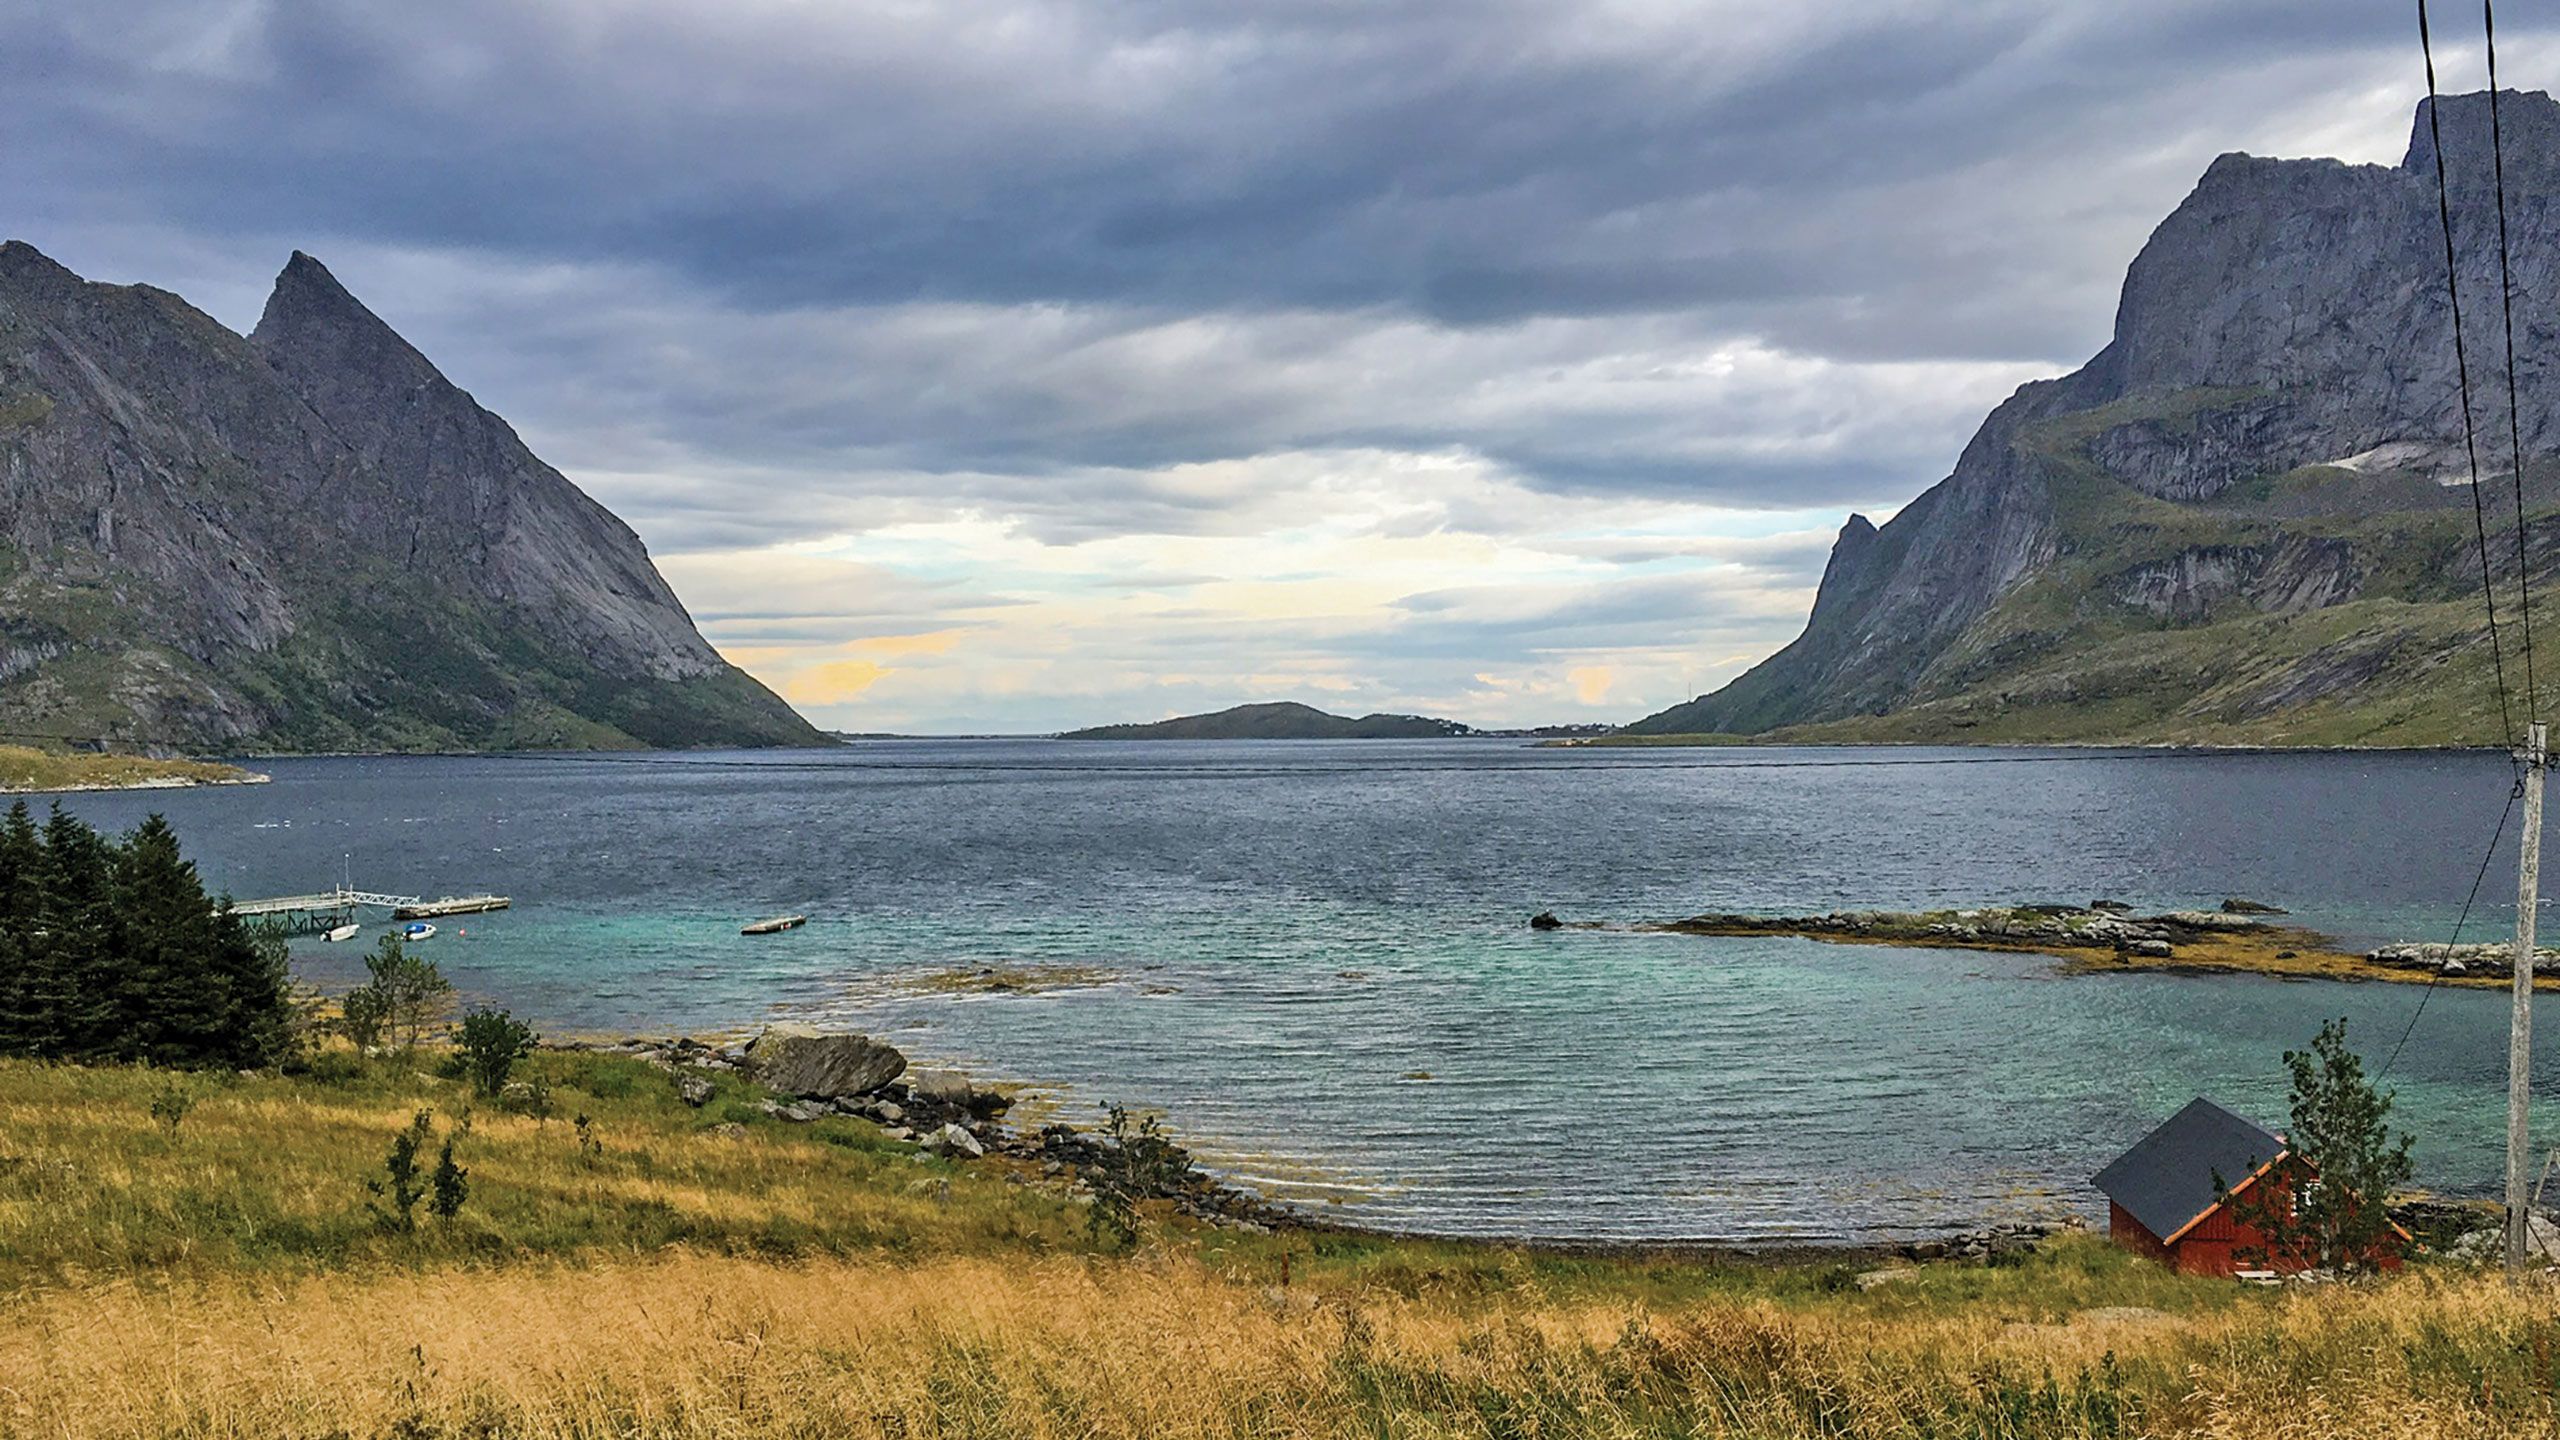  A fjord near Reine, one of the villages on the Lofoten archipelago. Photo by William Nash